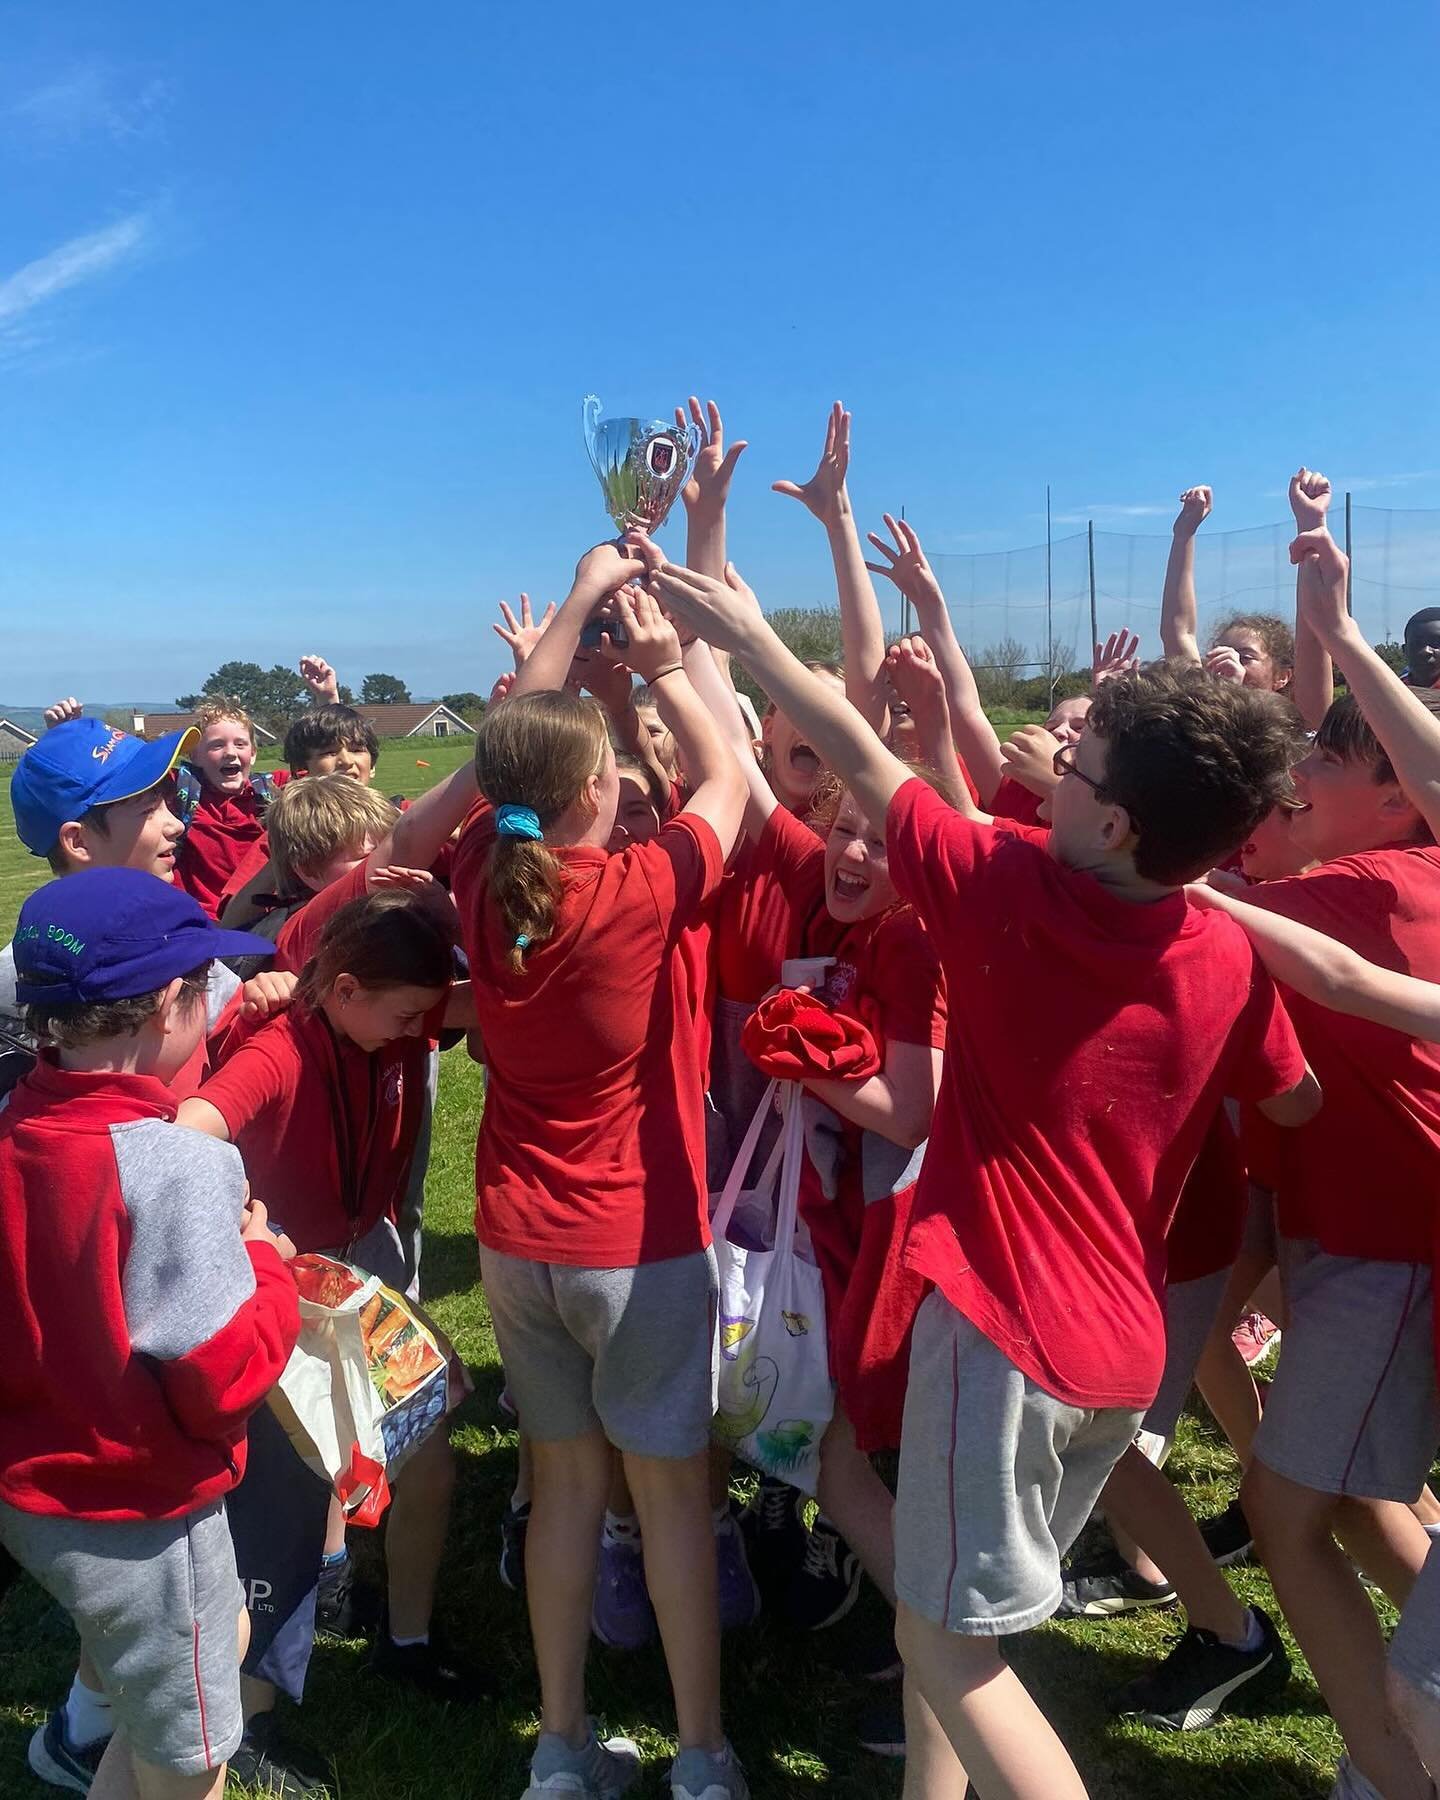 The sun was shining last Friday for our annual Primary School Sports Day ☀️ Students in 4th, 5th and 6th Class from @staroftheseapw, St Luke&rsquo;s National School Douglas, Scoil Barra Naofa Monkstown and @ringaskiddylowerharbourns took part in a fu